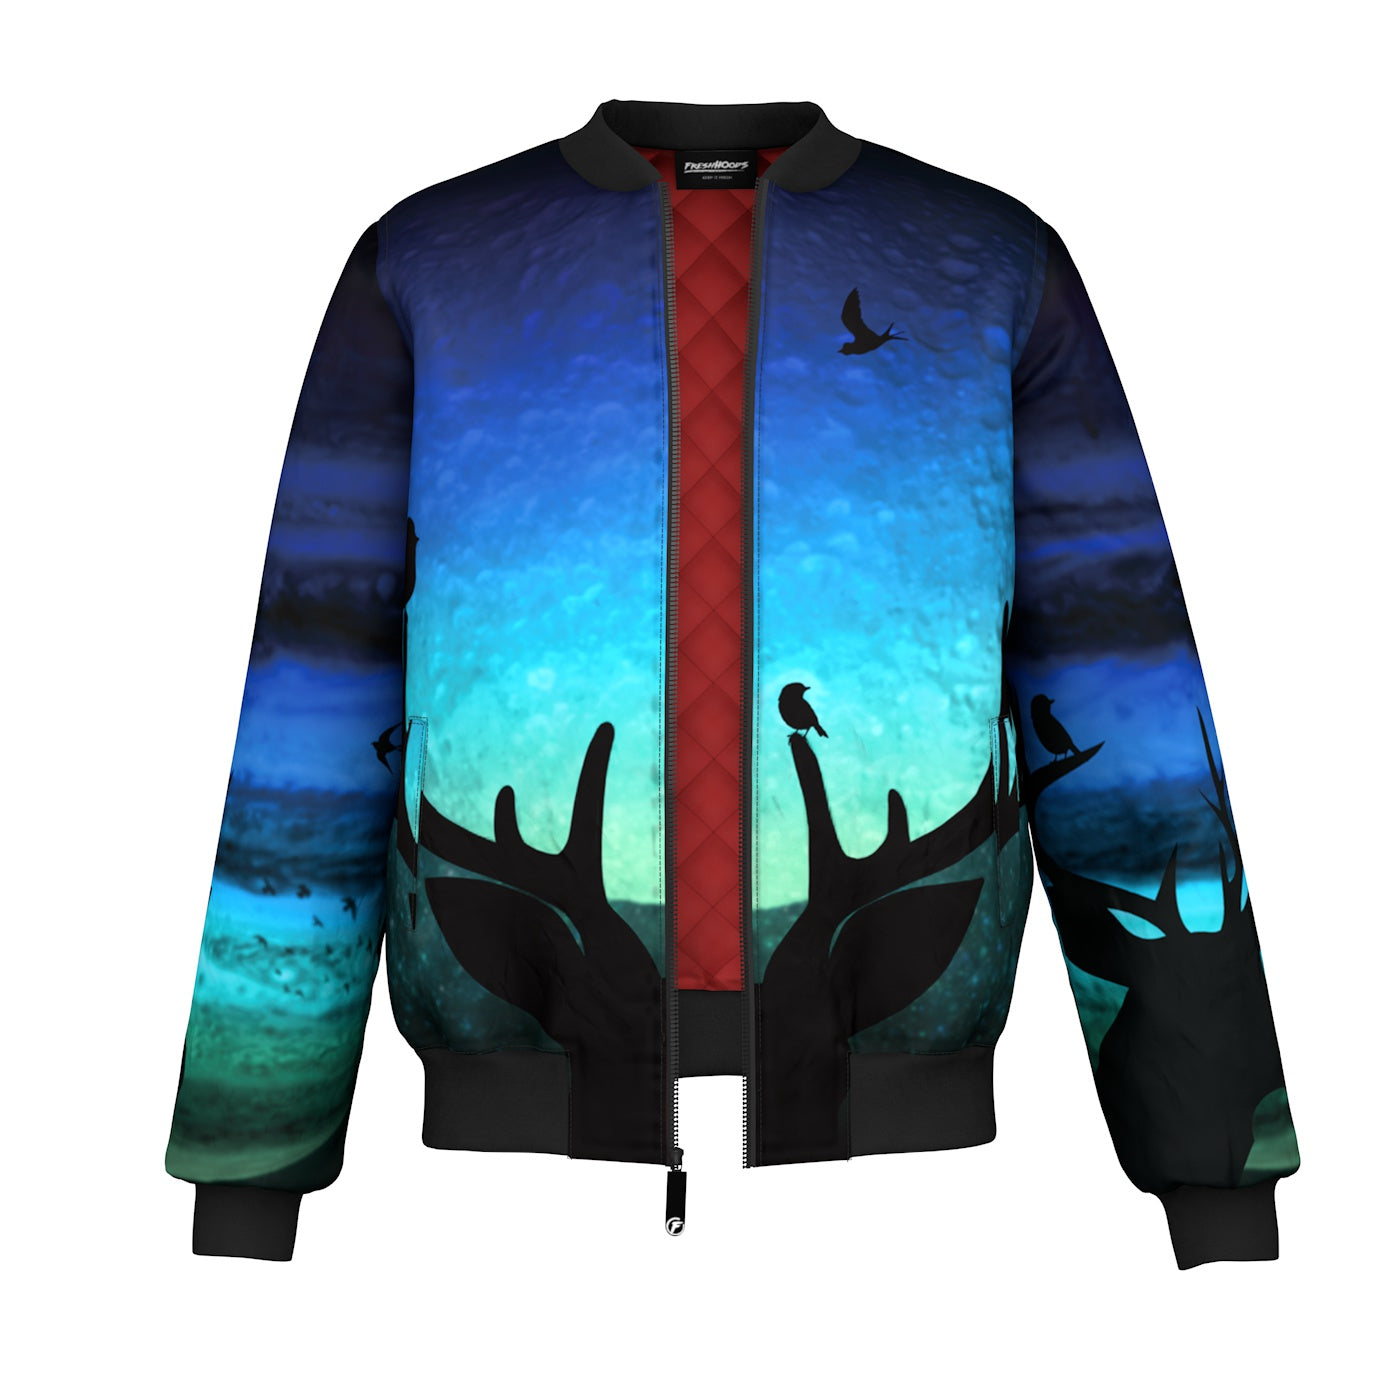 Magical Moment Bomber Jacket